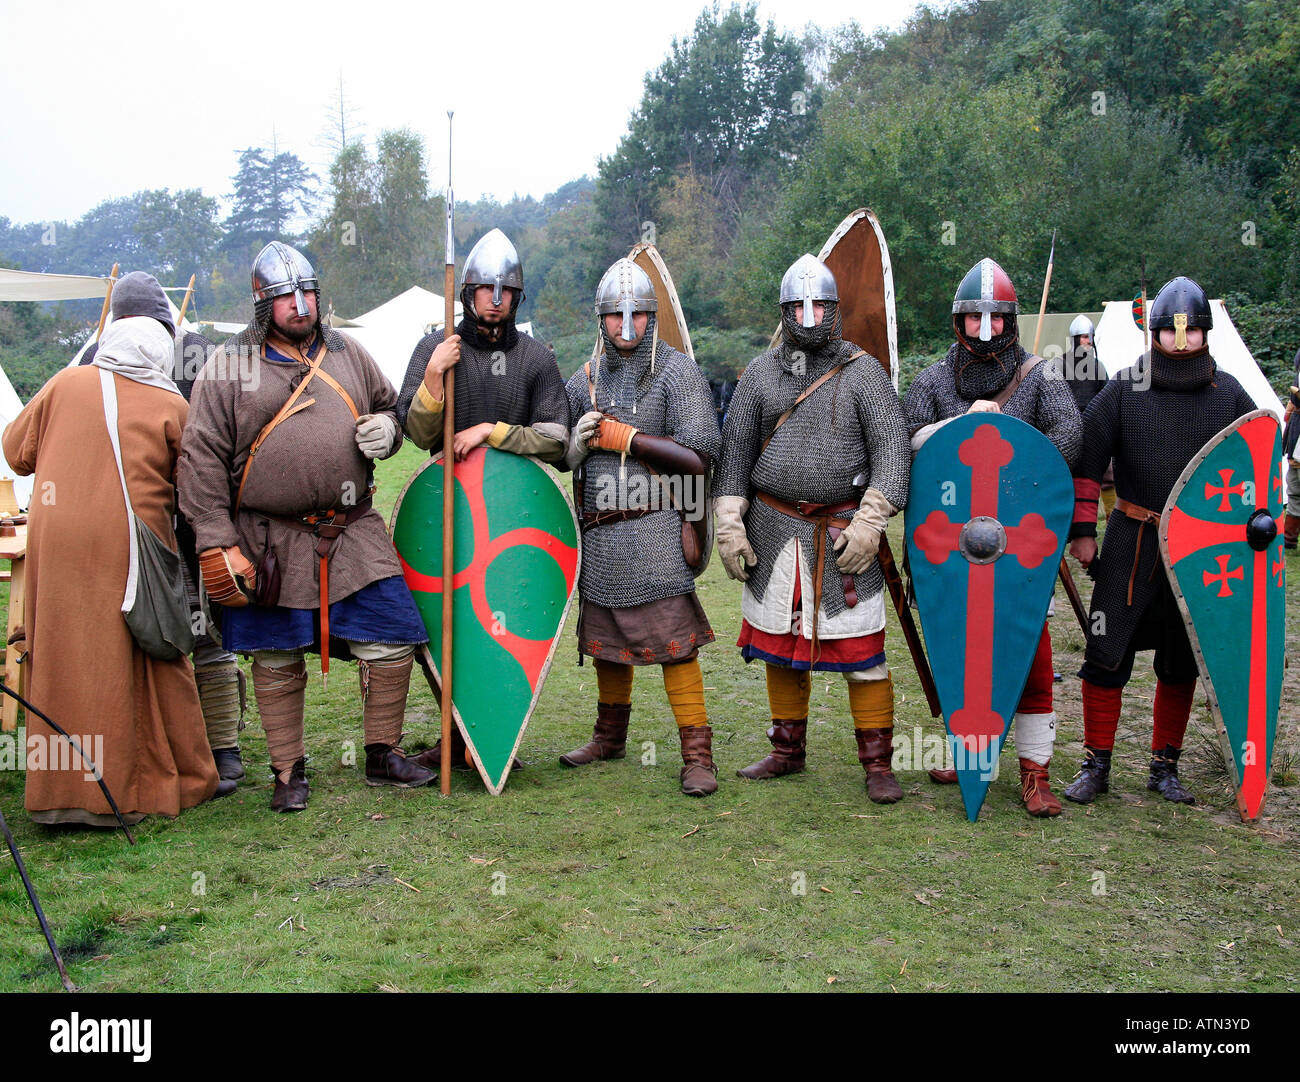 Soldiers from Saxon Army at the campsite in 1066 Battle of Hastings England Re creation Stock Photo